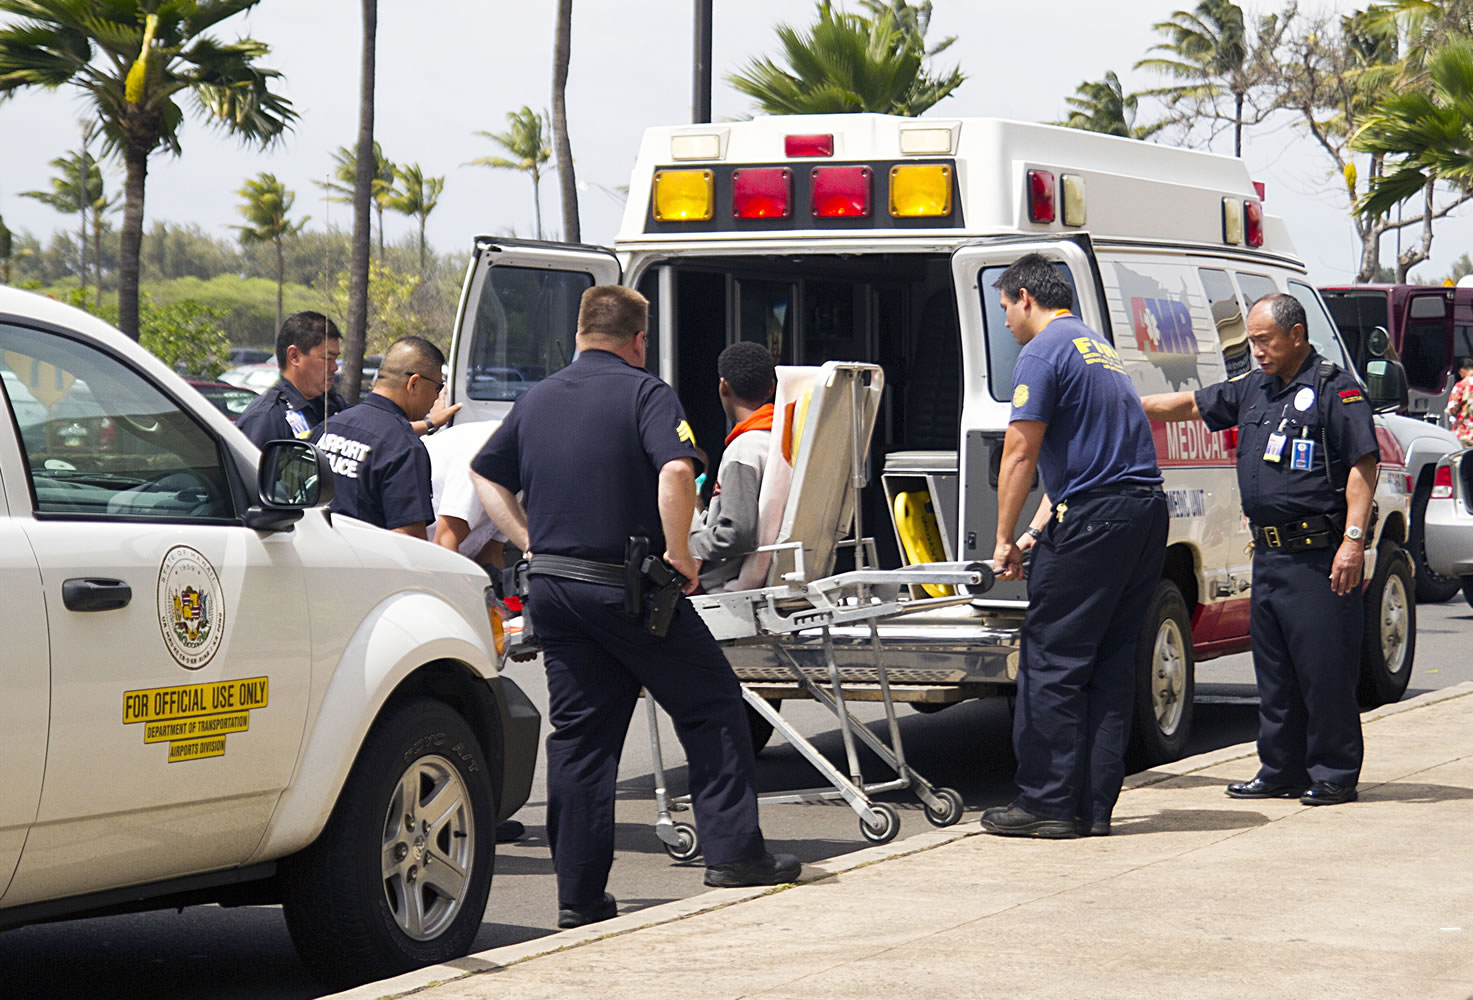 A 15-year-old boy sits on a stretcher April 20 after stowing away in the wheel well of a flight from San Jose, Calif., to Maui at Kahului Airport in Kahului, Maui, Hawaii.